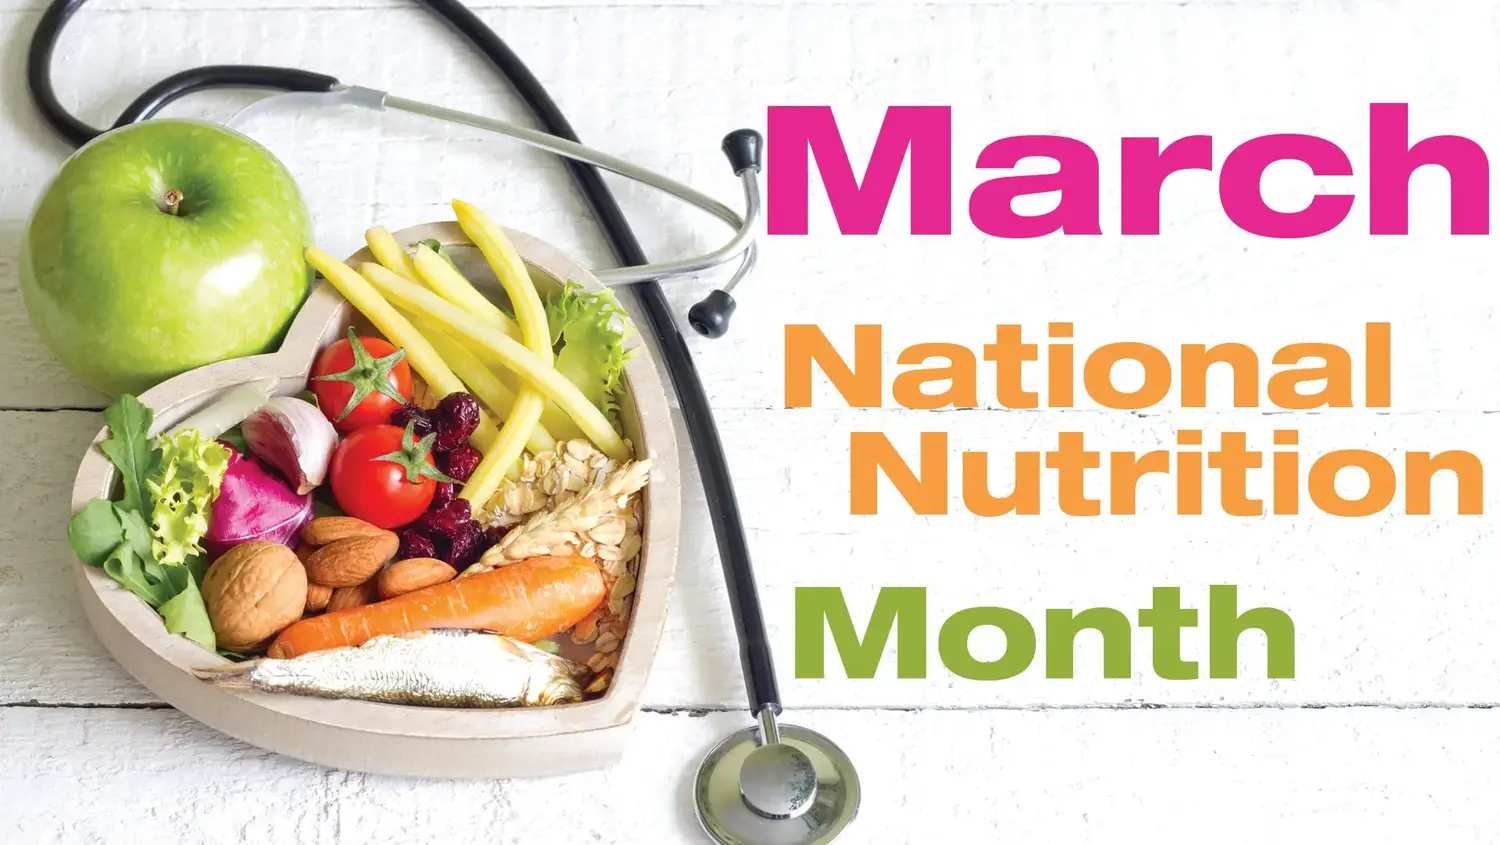 5 more tips for National Nutrition Month